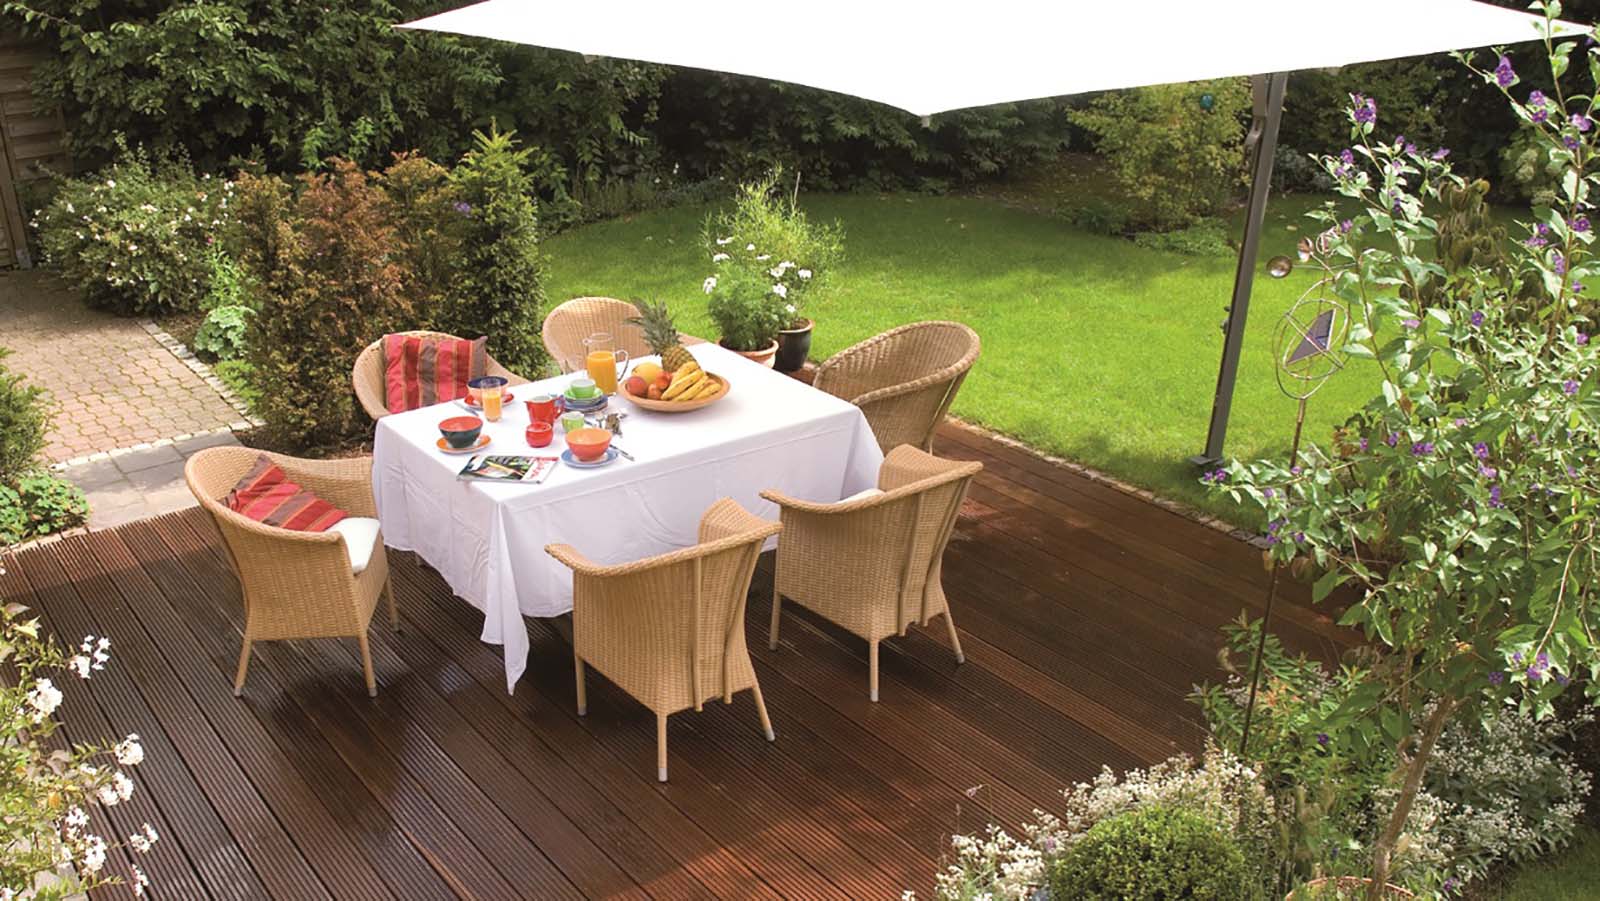 We look after ourselves and invest in our health and well-being, so why not do the same with your decking, fencing, cladding and other wooden structures...